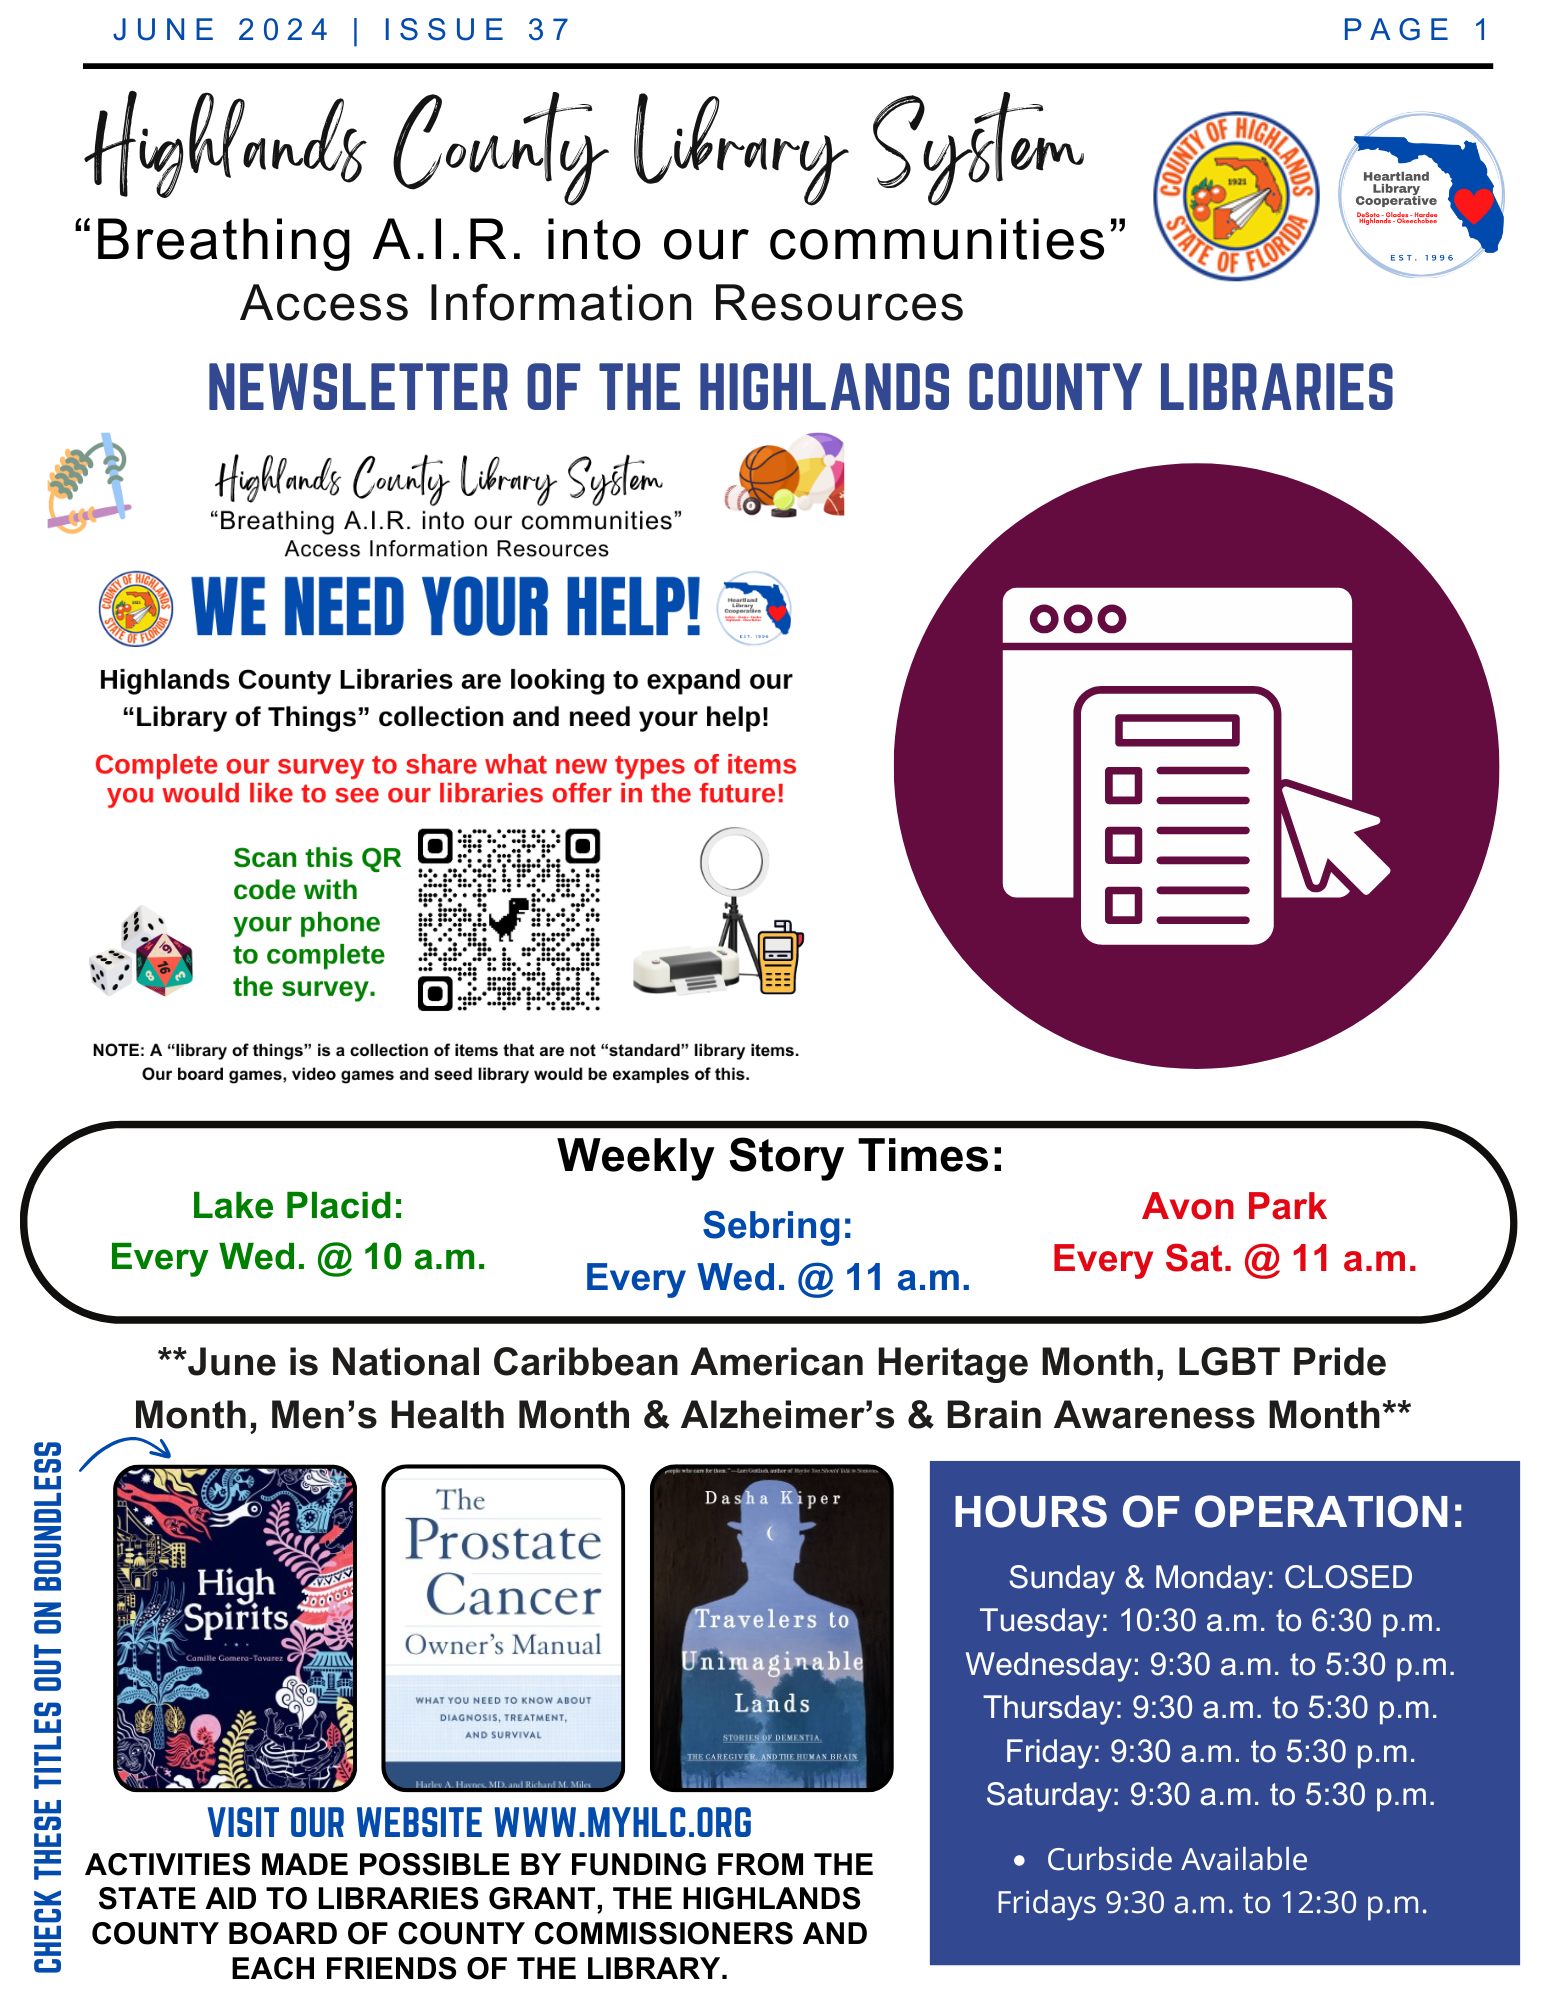 This is page one of the Highlands County Library System June 2024 newsletter. The full PDF version of the newsletter is available by clicking on the image.